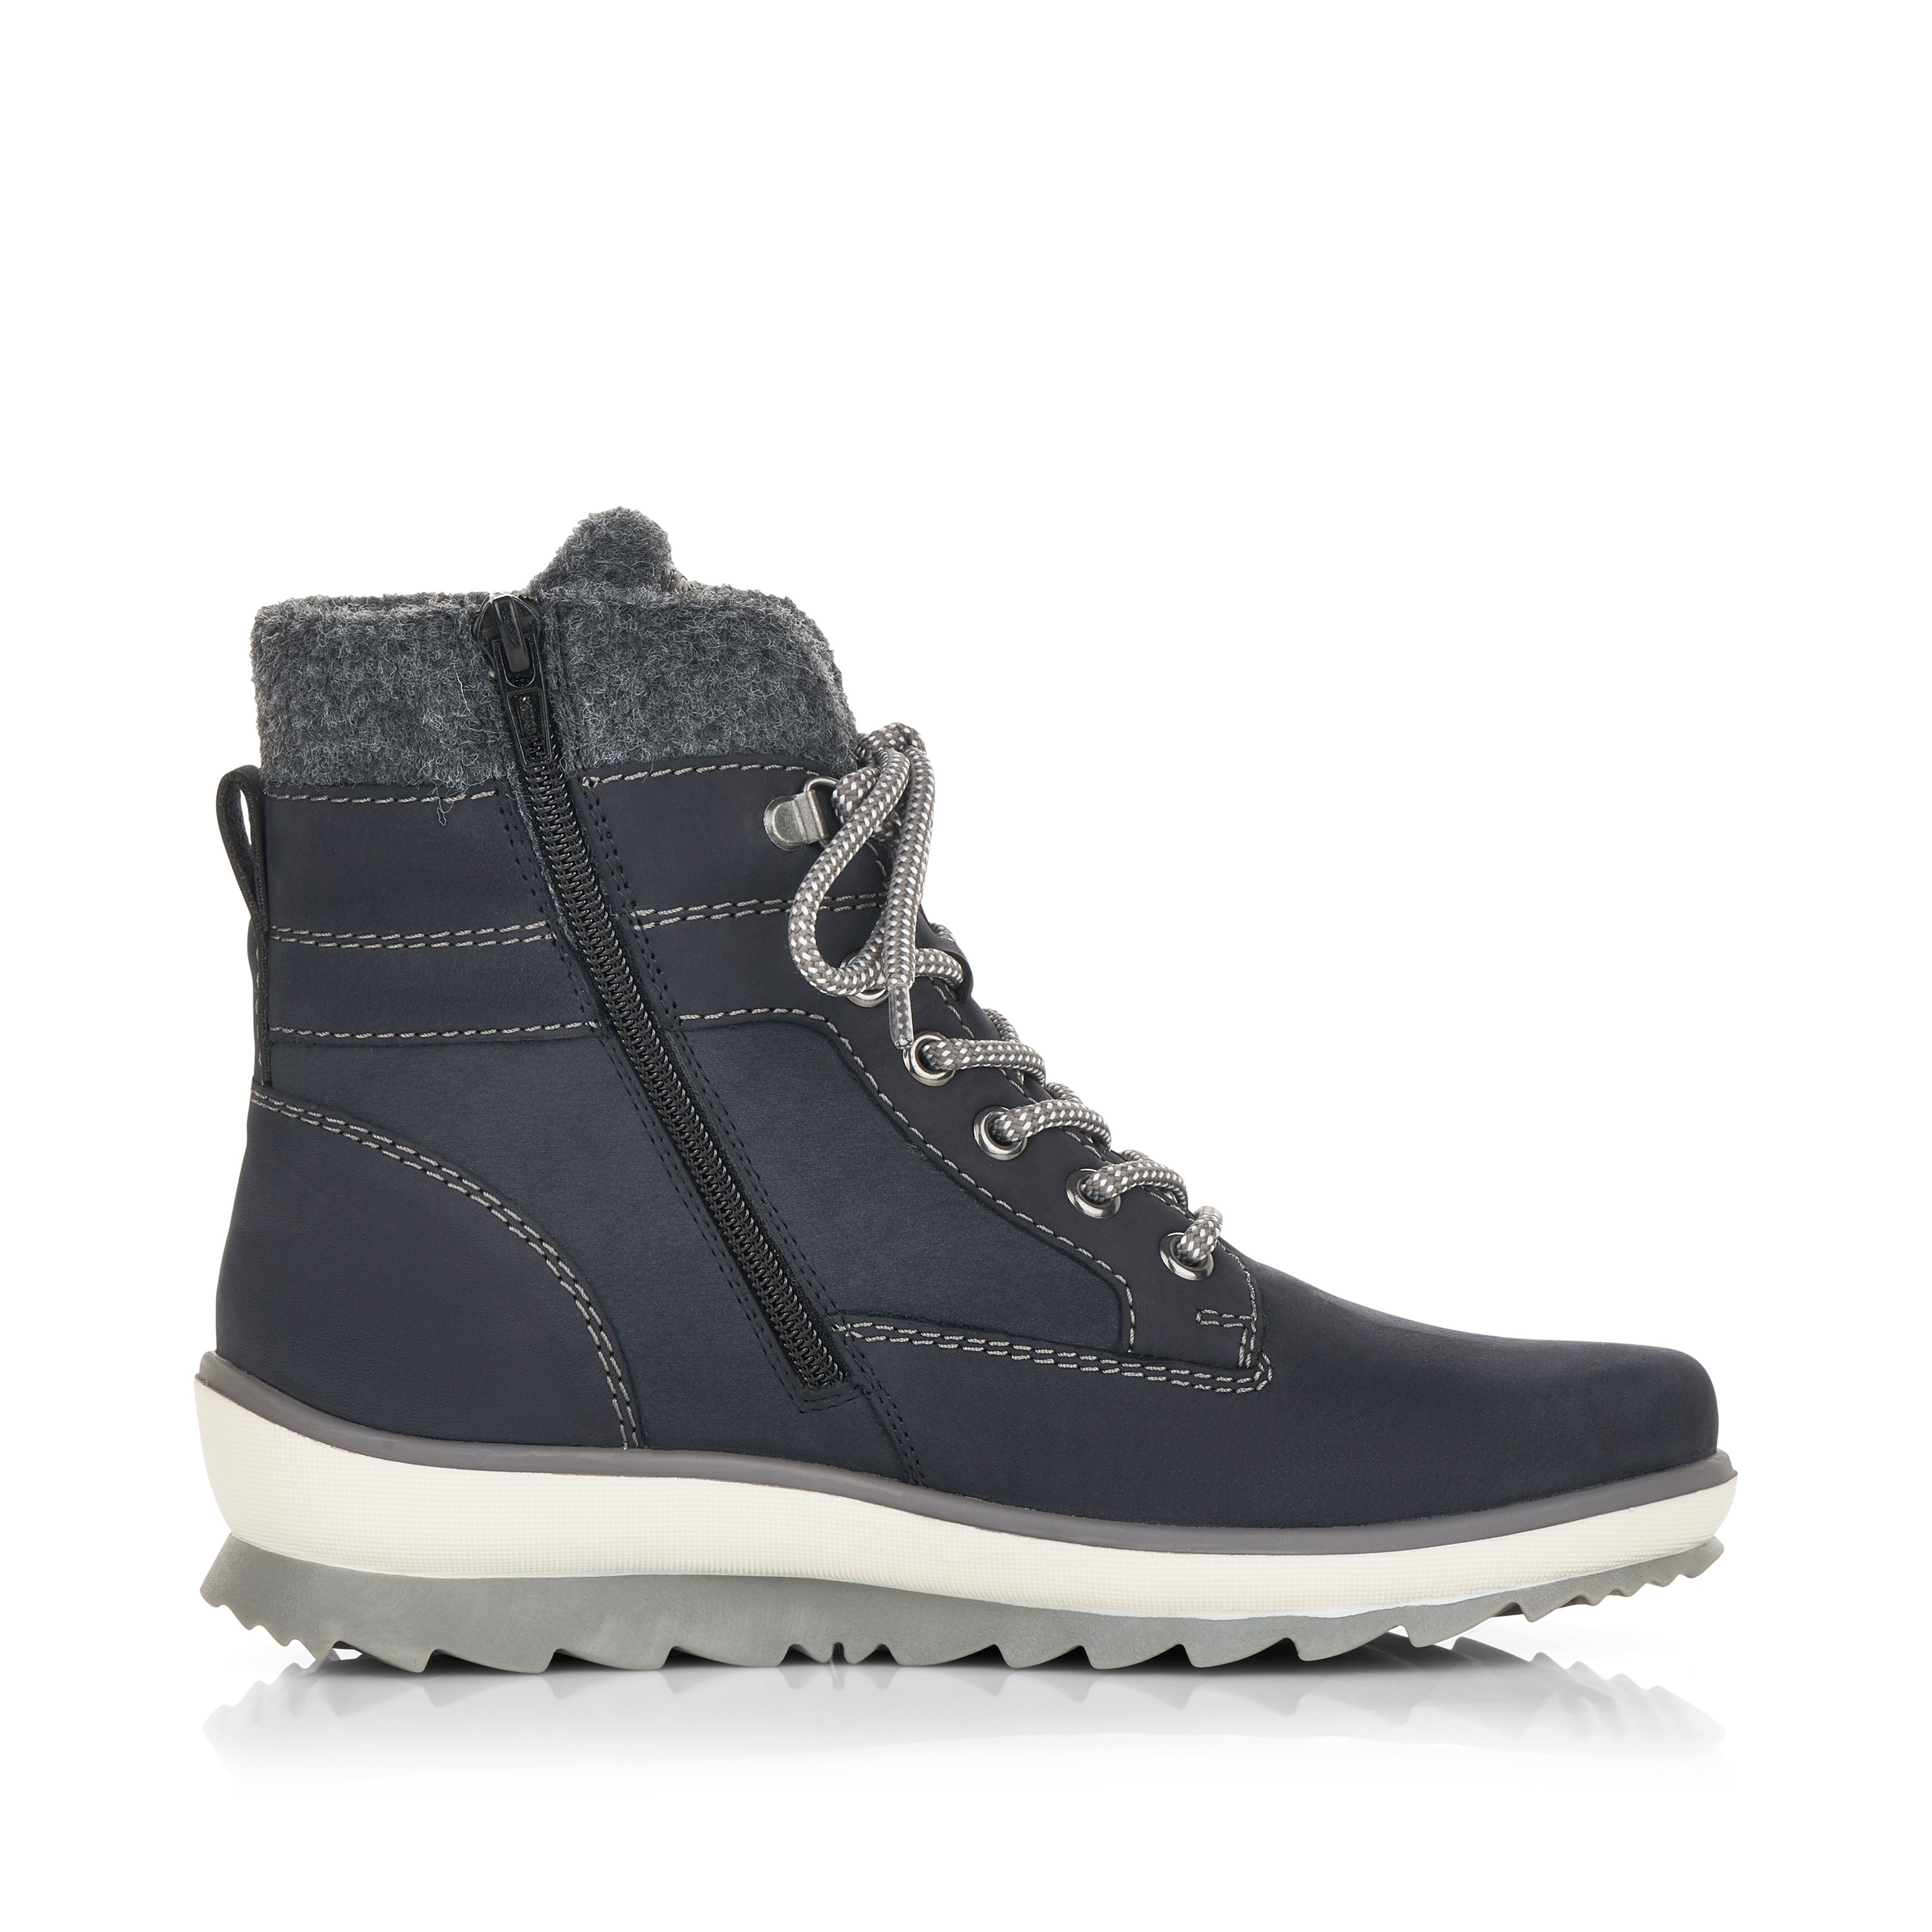 Dark blue remonte women´s lace-up boots R8477-14 with cushioning profile sole. Shoe inside